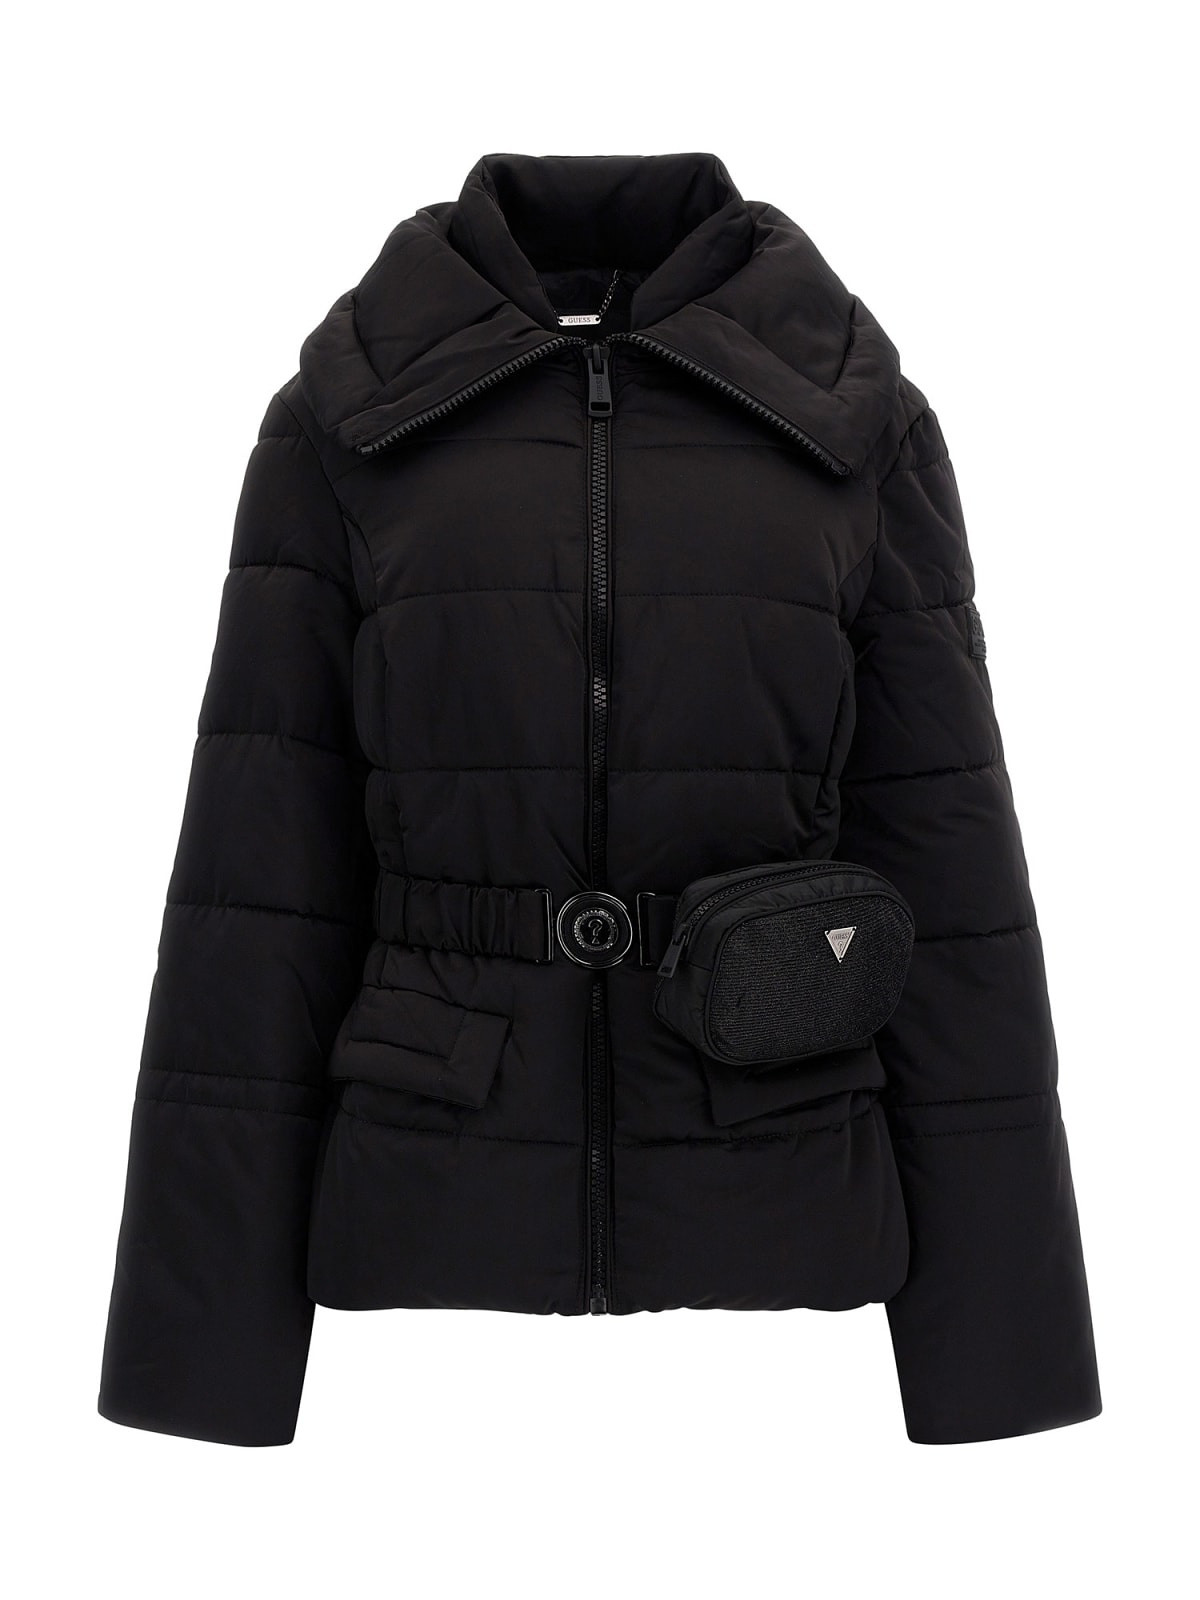 Down jacket with belt with mini bag applied, Black, large image number 0